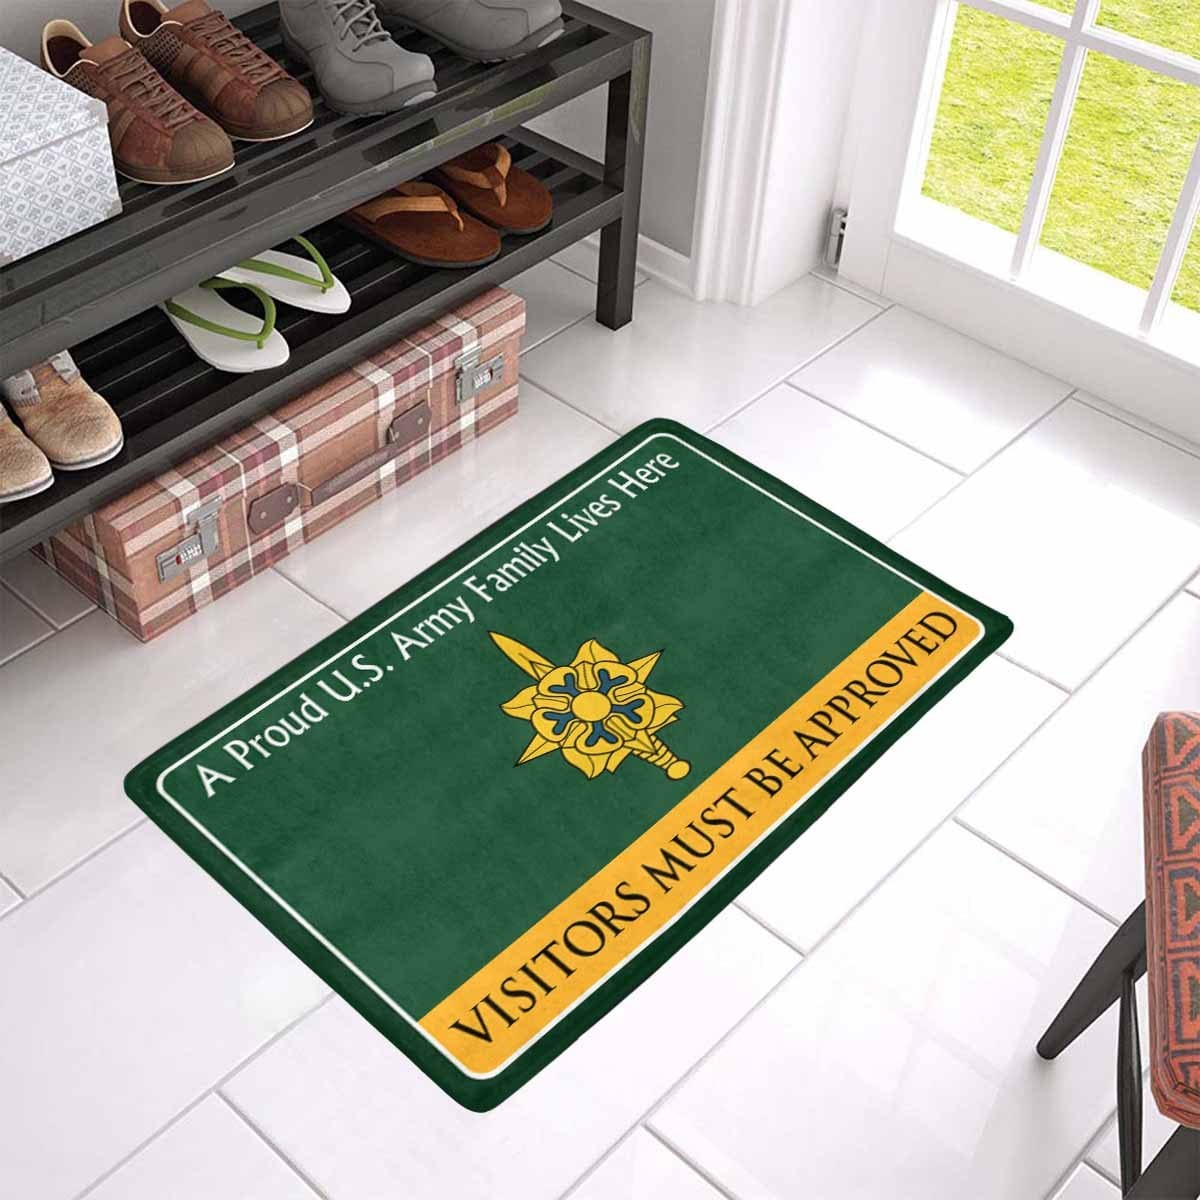 US Army Military Intelligence Branch Family Doormat - Visitors must be approved Doormat (23.6 inches x 15.7 inches)-Doormat-Army-Branch-Veterans Nation